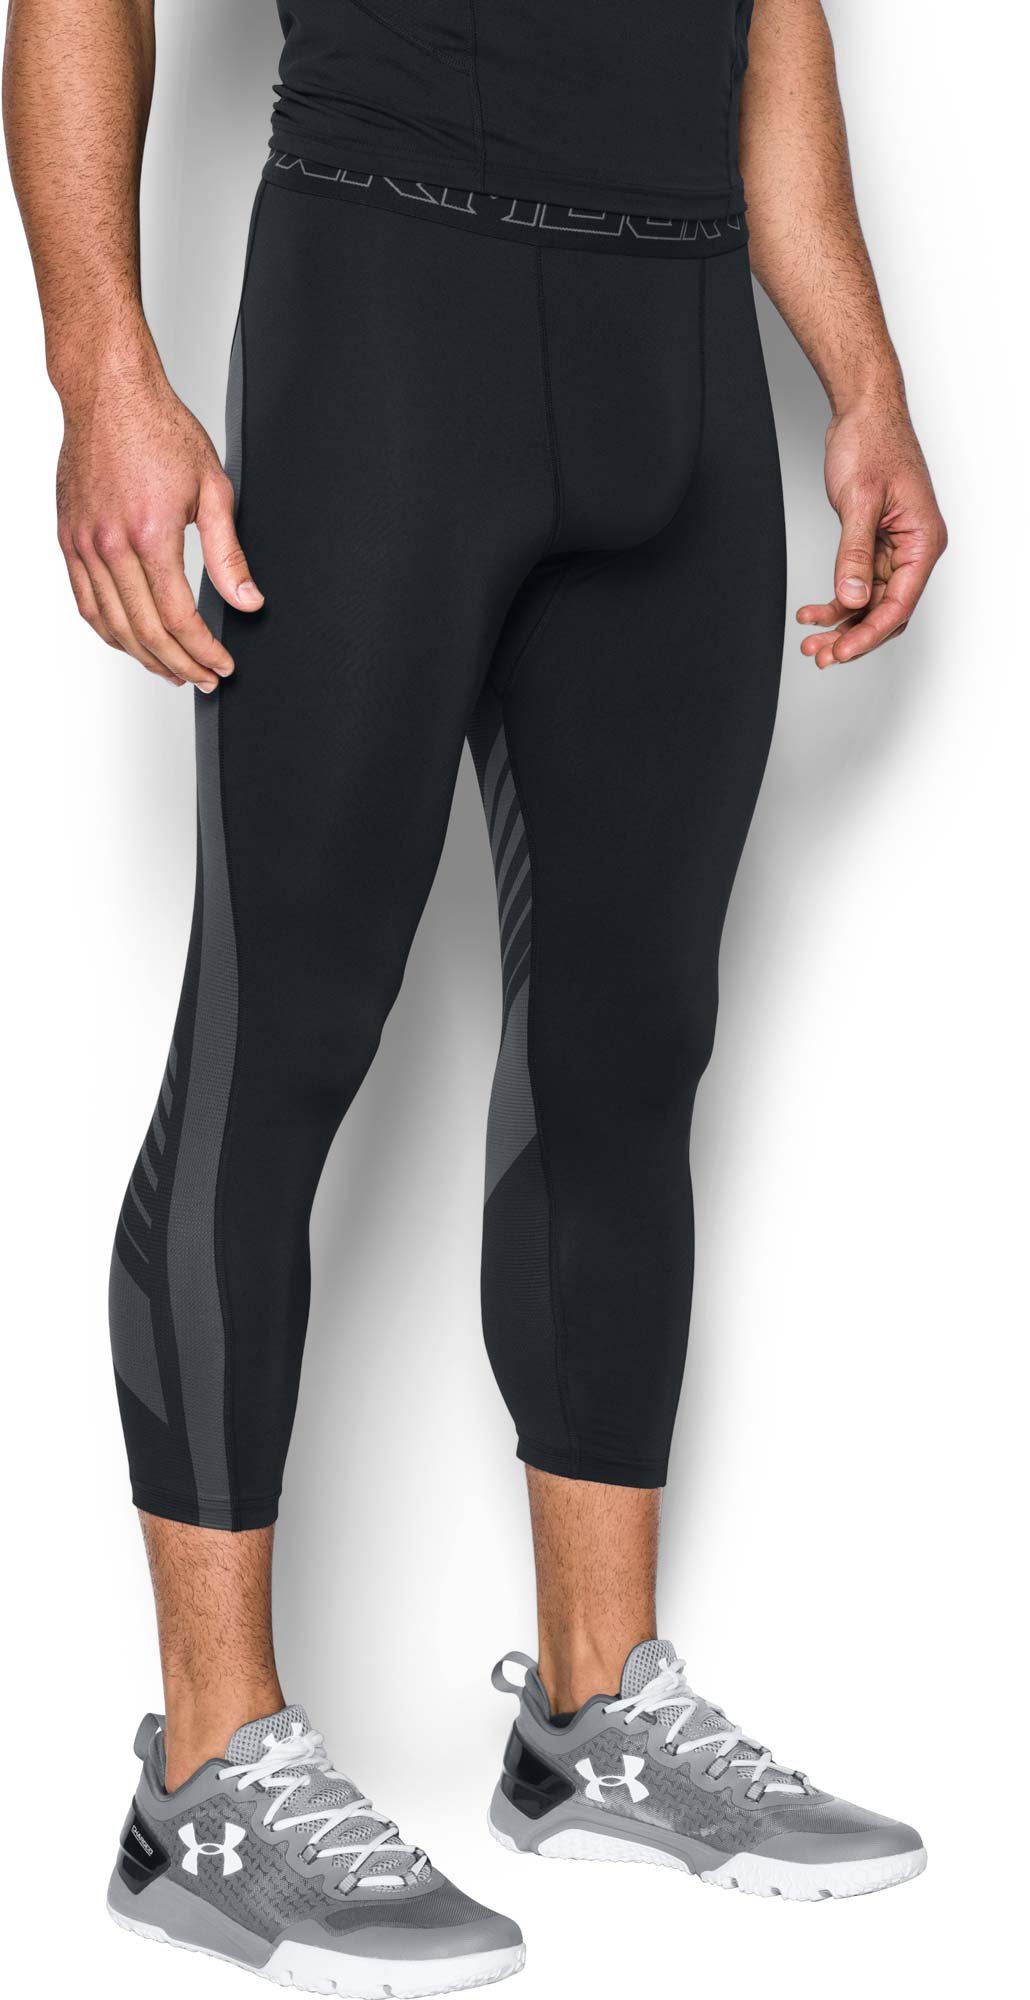 https://i1.t4s.cz/products/1289581-001/under-armour-hg-supervent-2-0-3-4-legging-119595-1289581-004.jpg